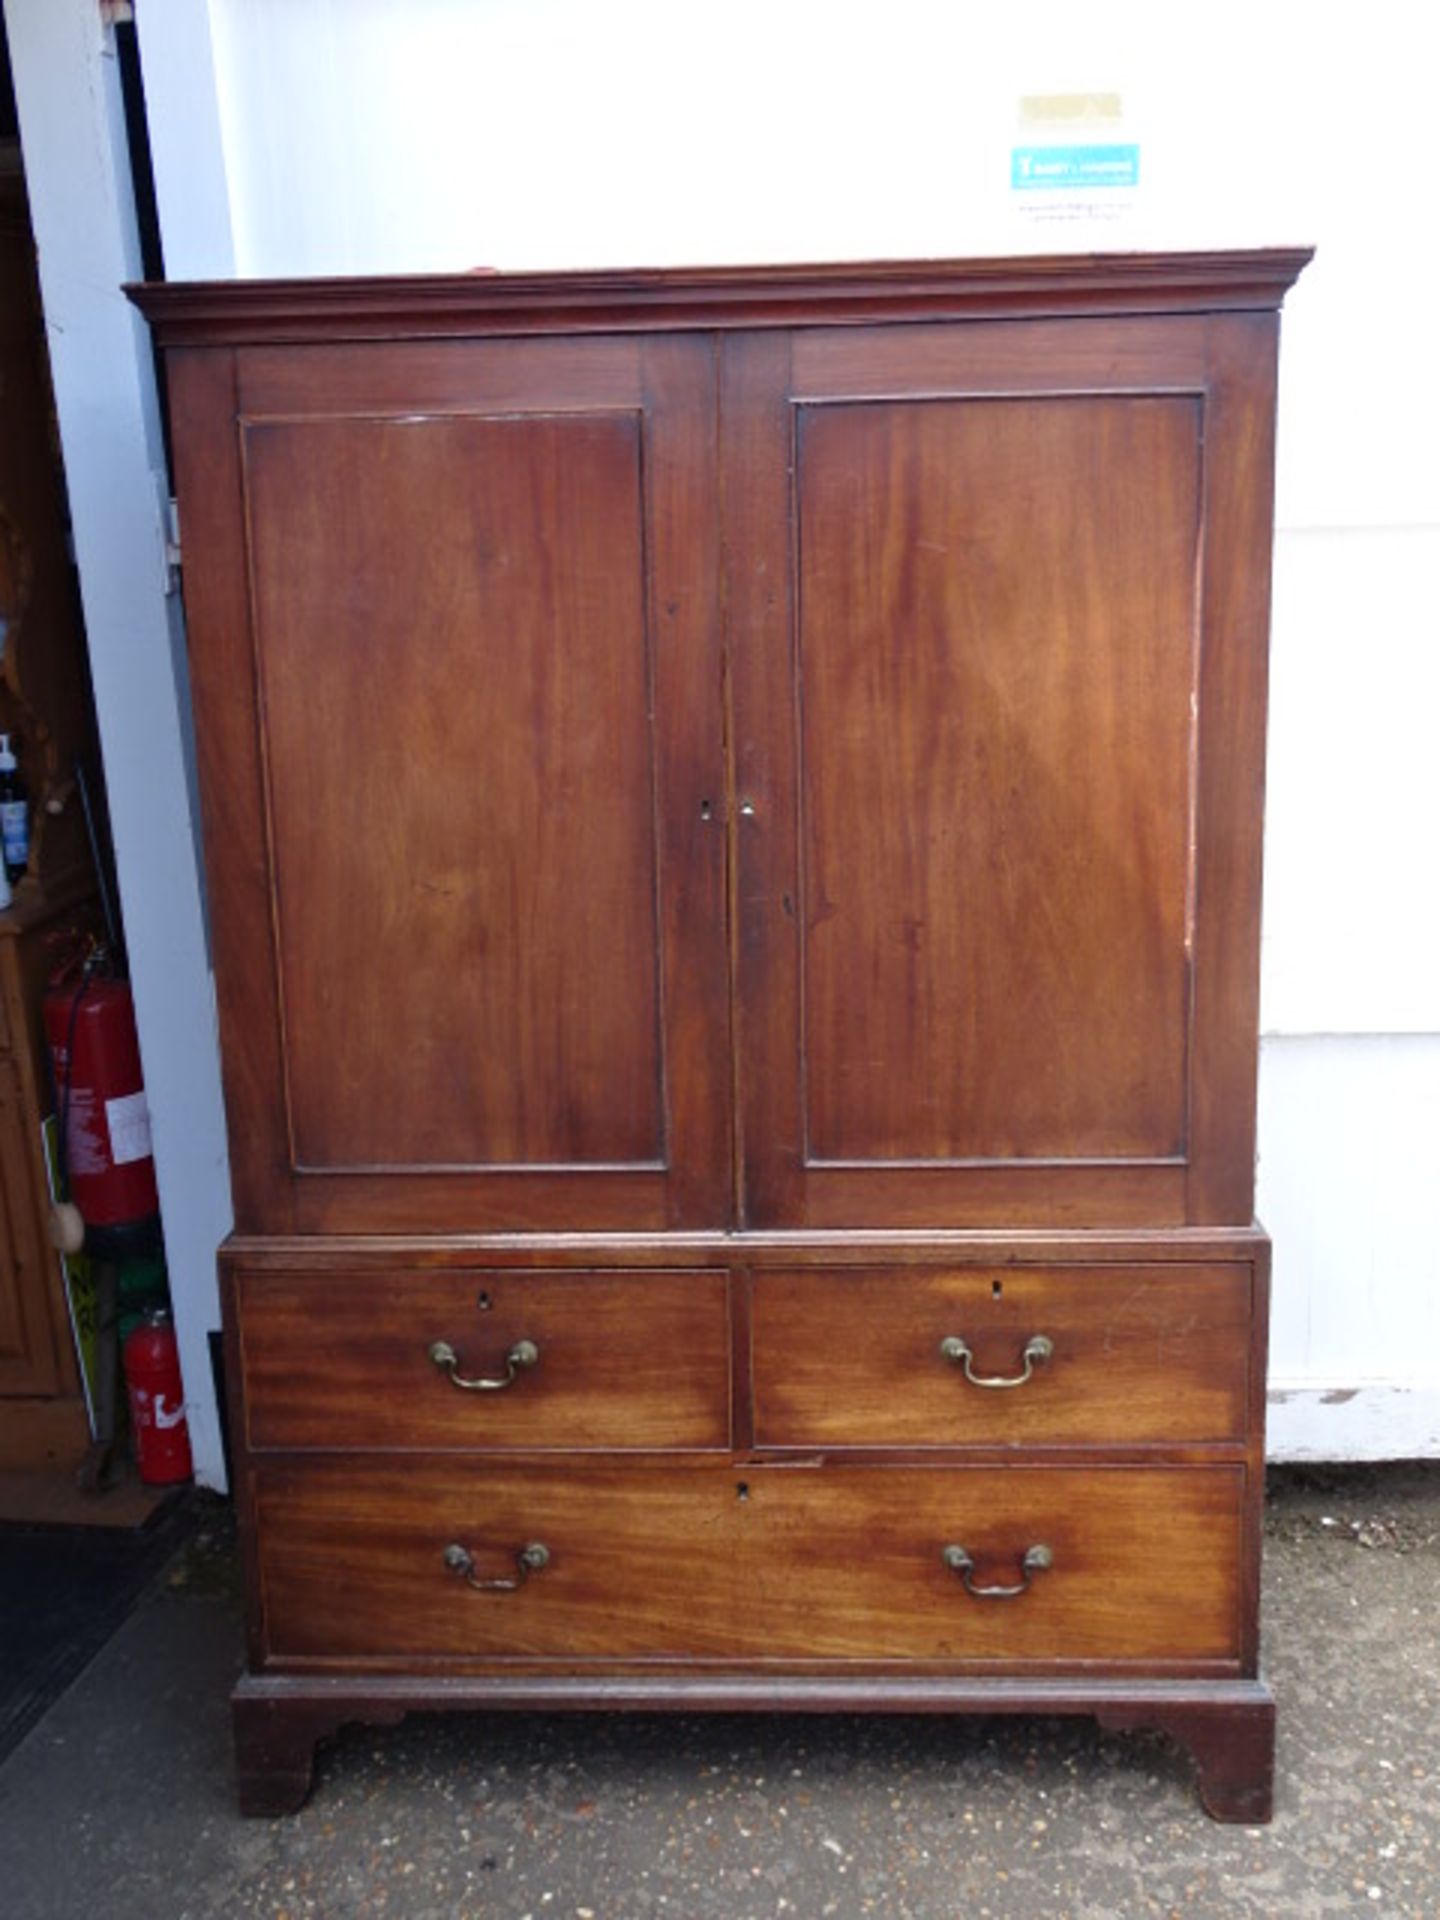 Mahogany linen press/cupboard with brass handles (needs some restoration, beading missing around